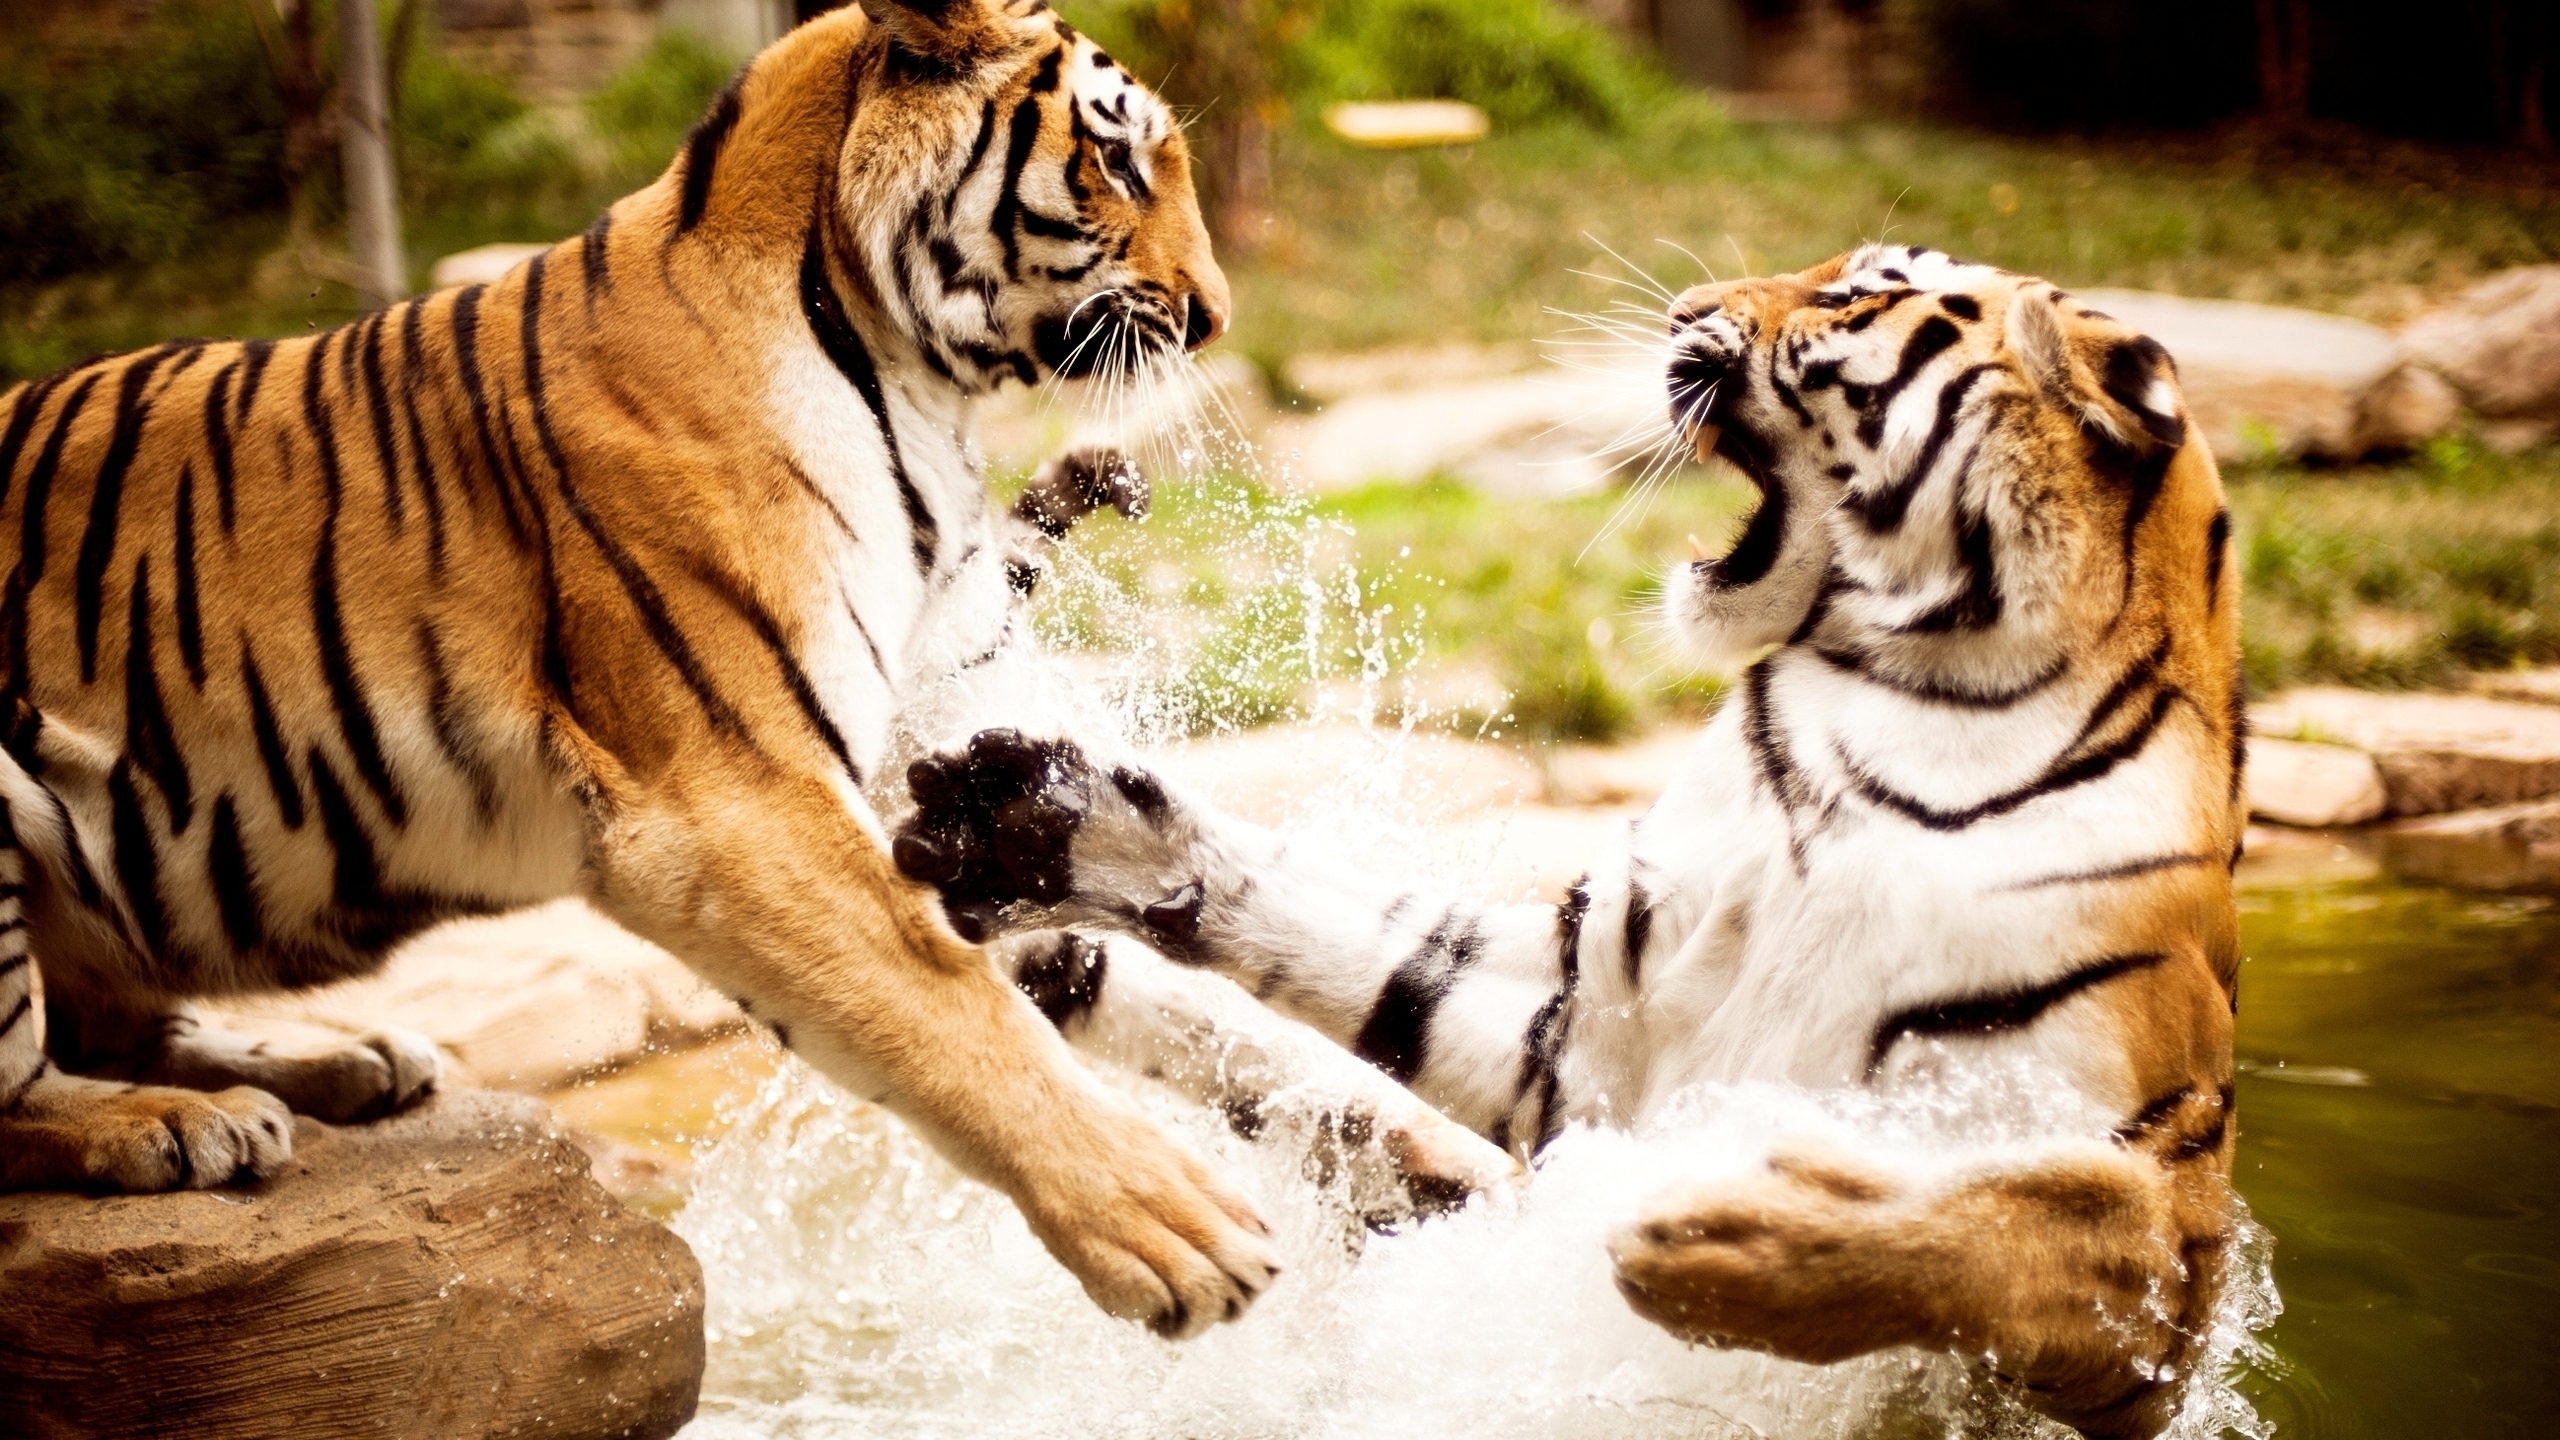 Tigers Fight for 2560x1440 HDTV resolution